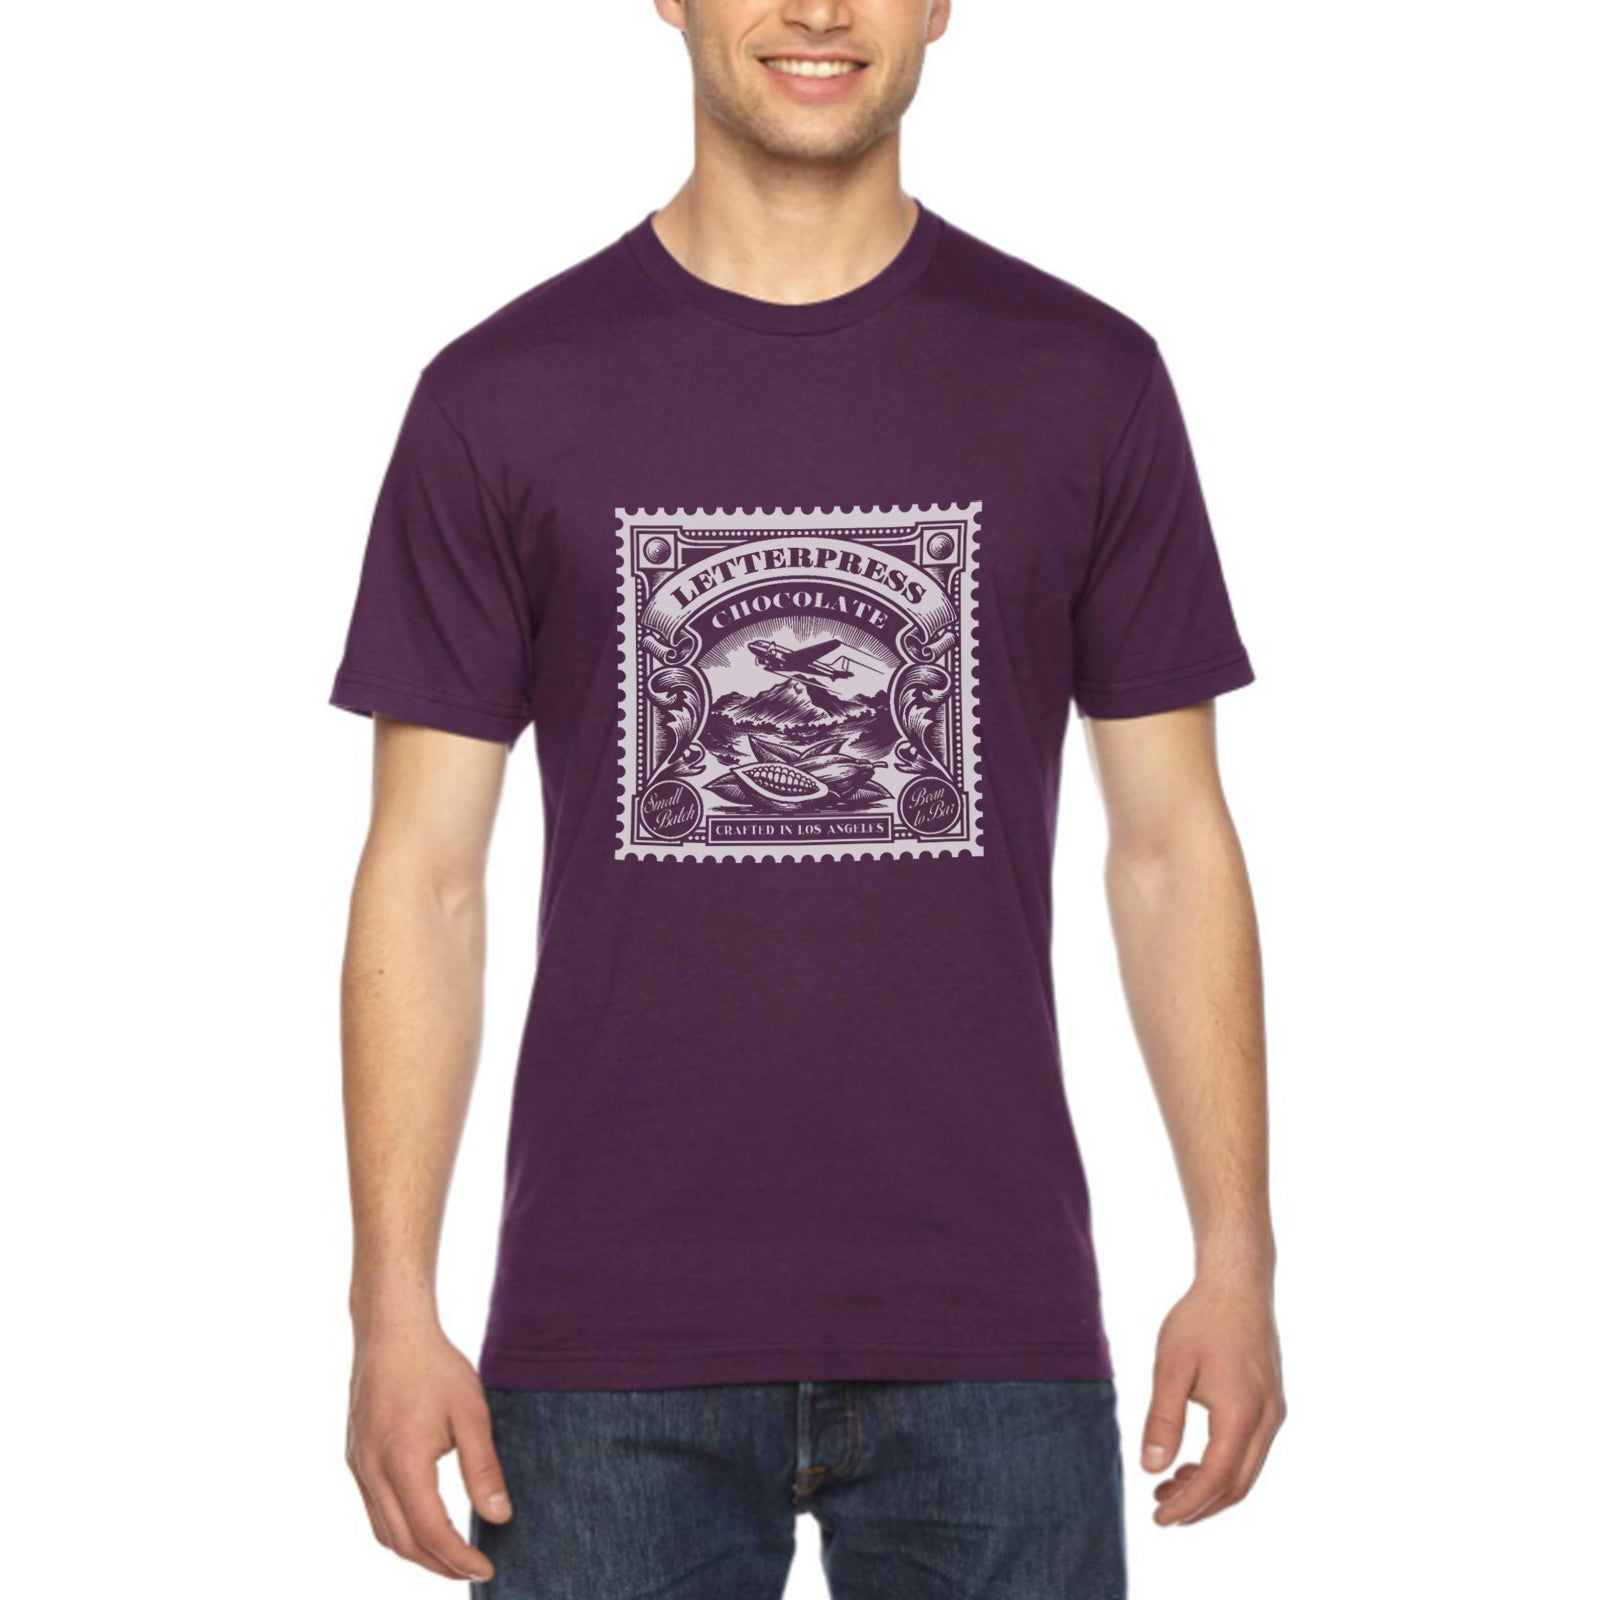 Men's eggplant - A man wearing a tshirt with a white letterpress chocolate logo